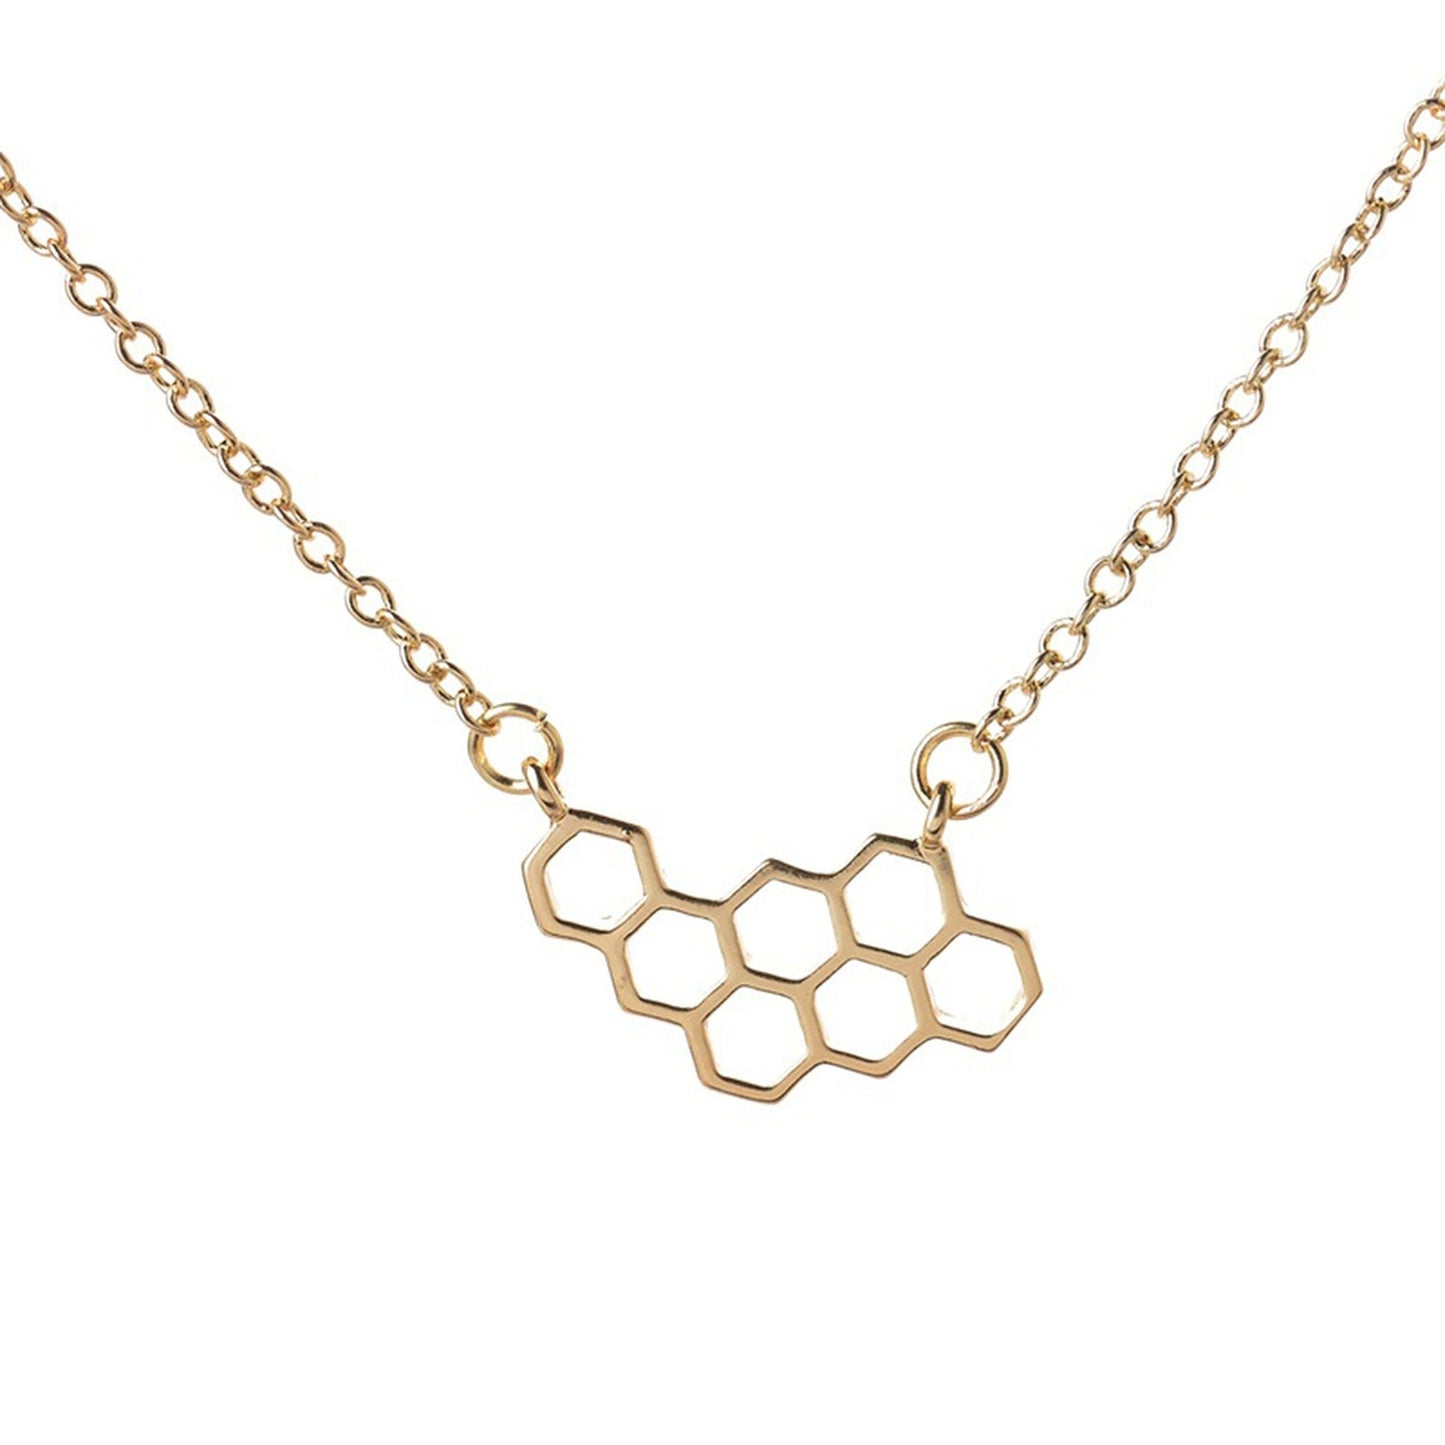 Silver or Gold Plated Geometric Honeycomb Necklace